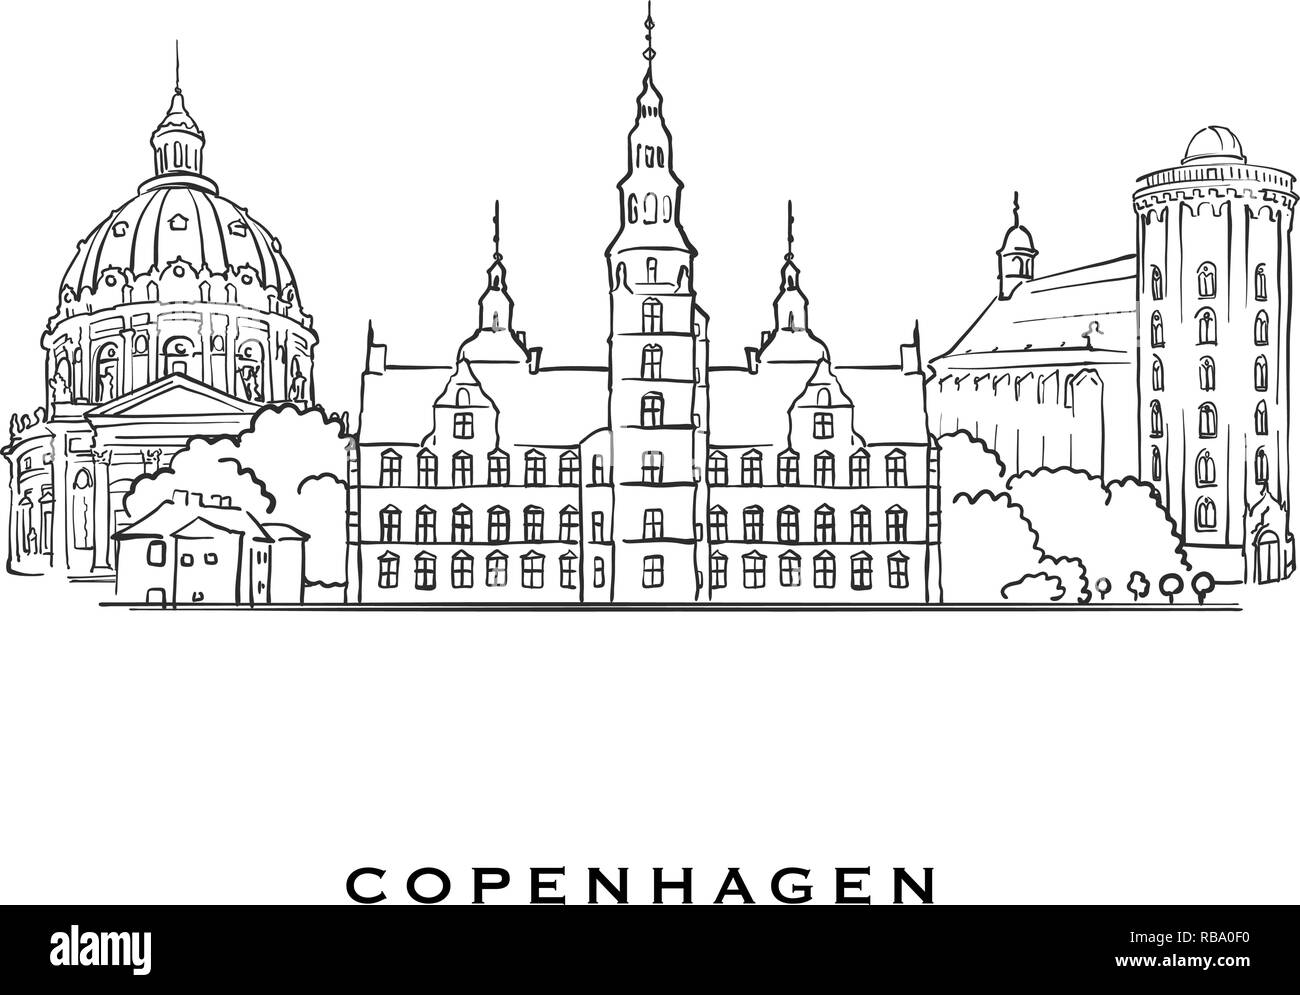 Copenhagen Denmark famous architecture. Outlined vector sketch separated on white background. Architecture drawings of all European capitals. Stock Vector